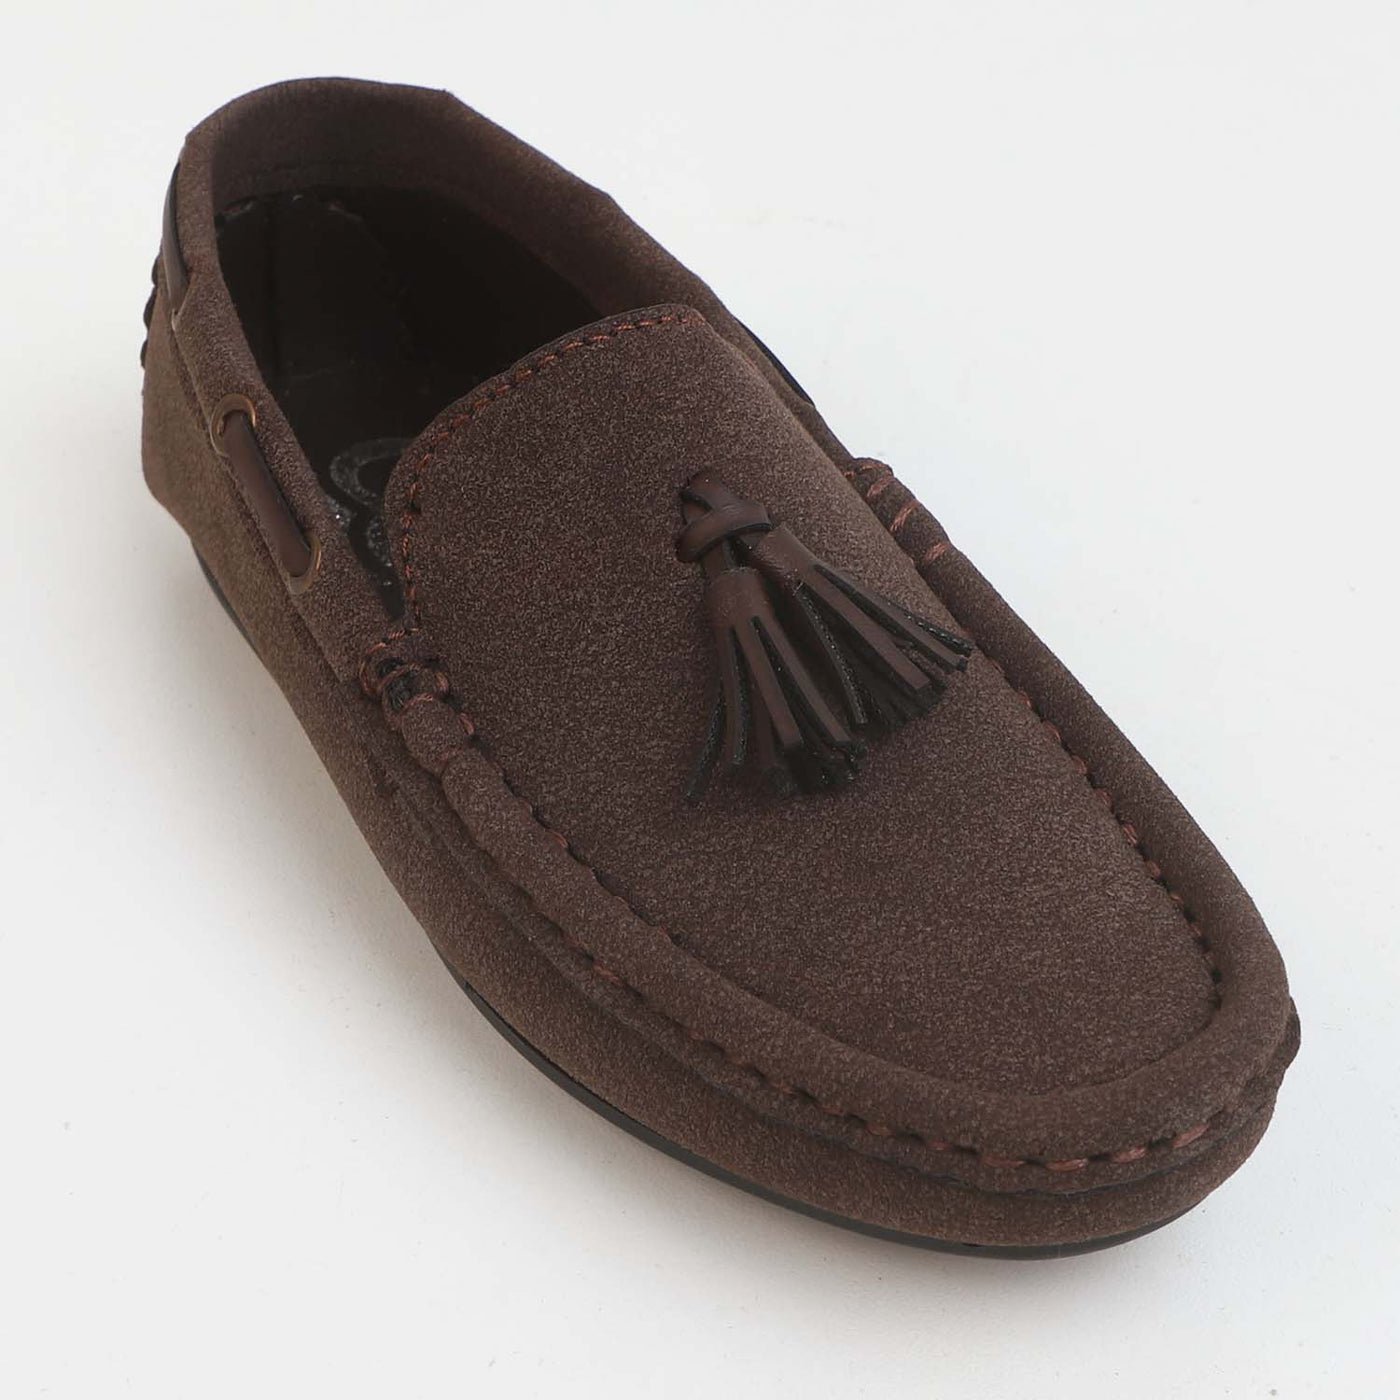 Boys Loafers LF-4 - BROWN